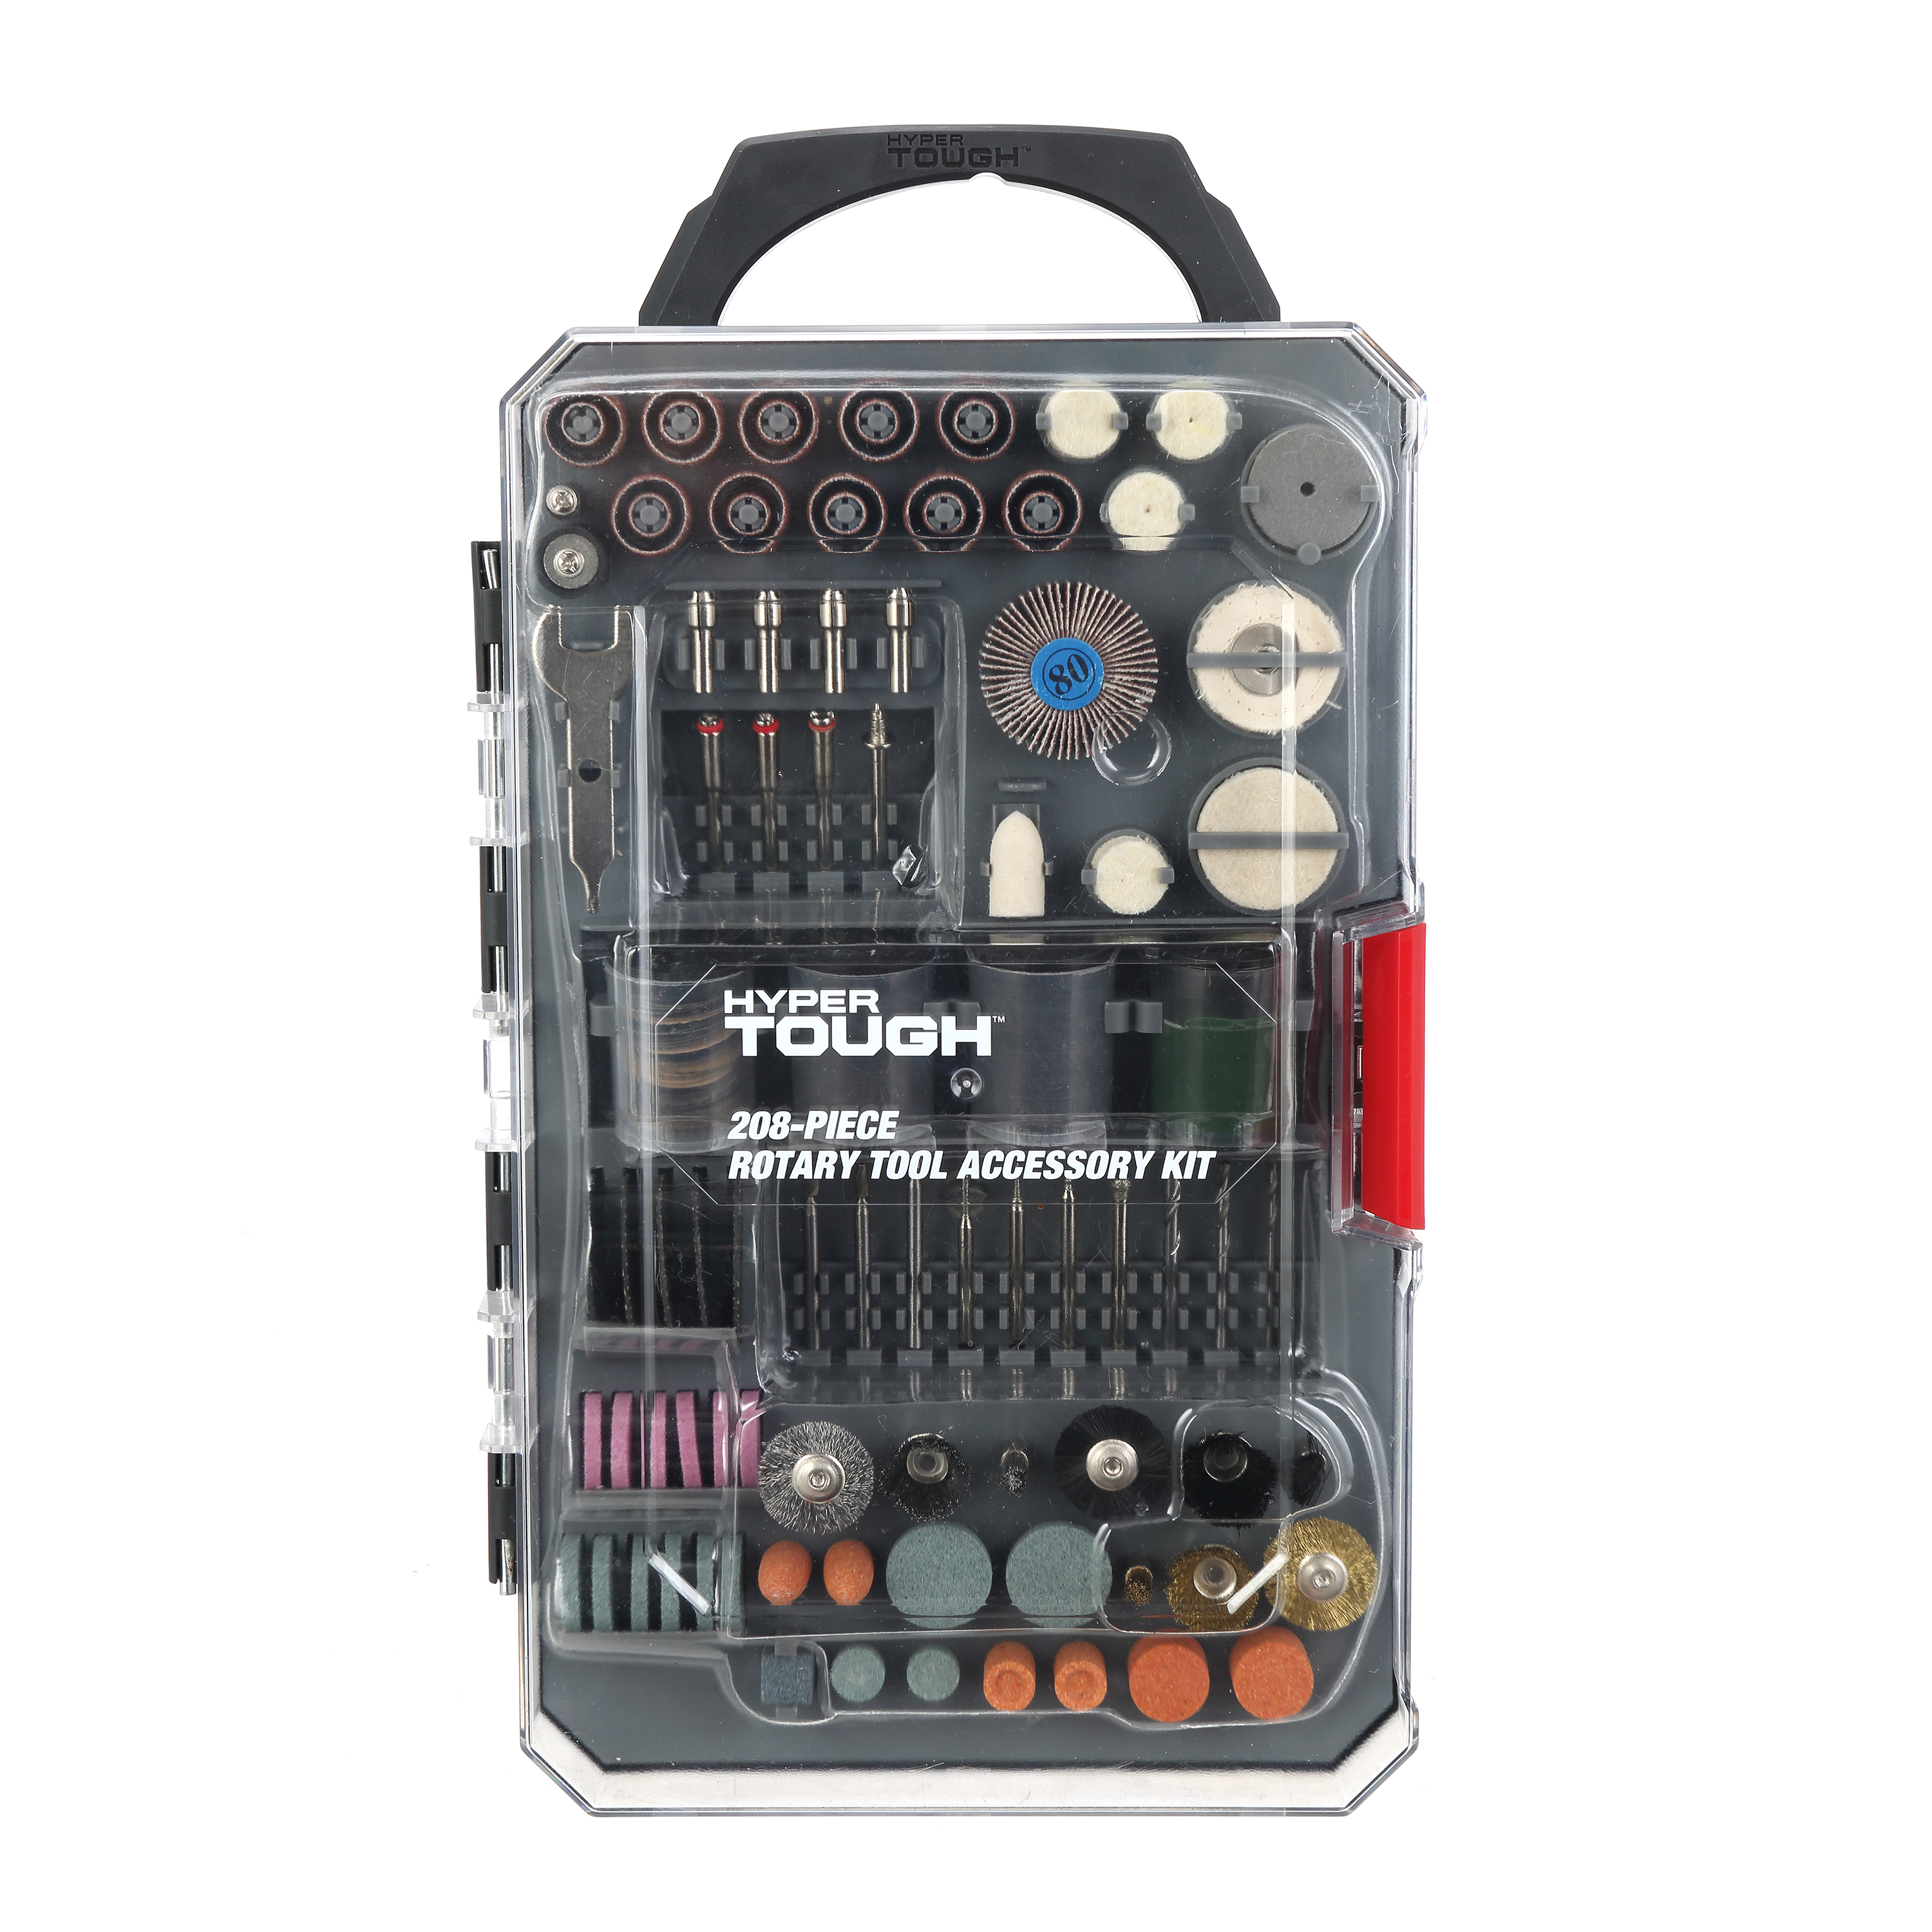 Hyper Tough 208 Piece Rotary Tool Accessory Kit with Storage Case, Product Accessories Included Multi Material - image 1 of 10